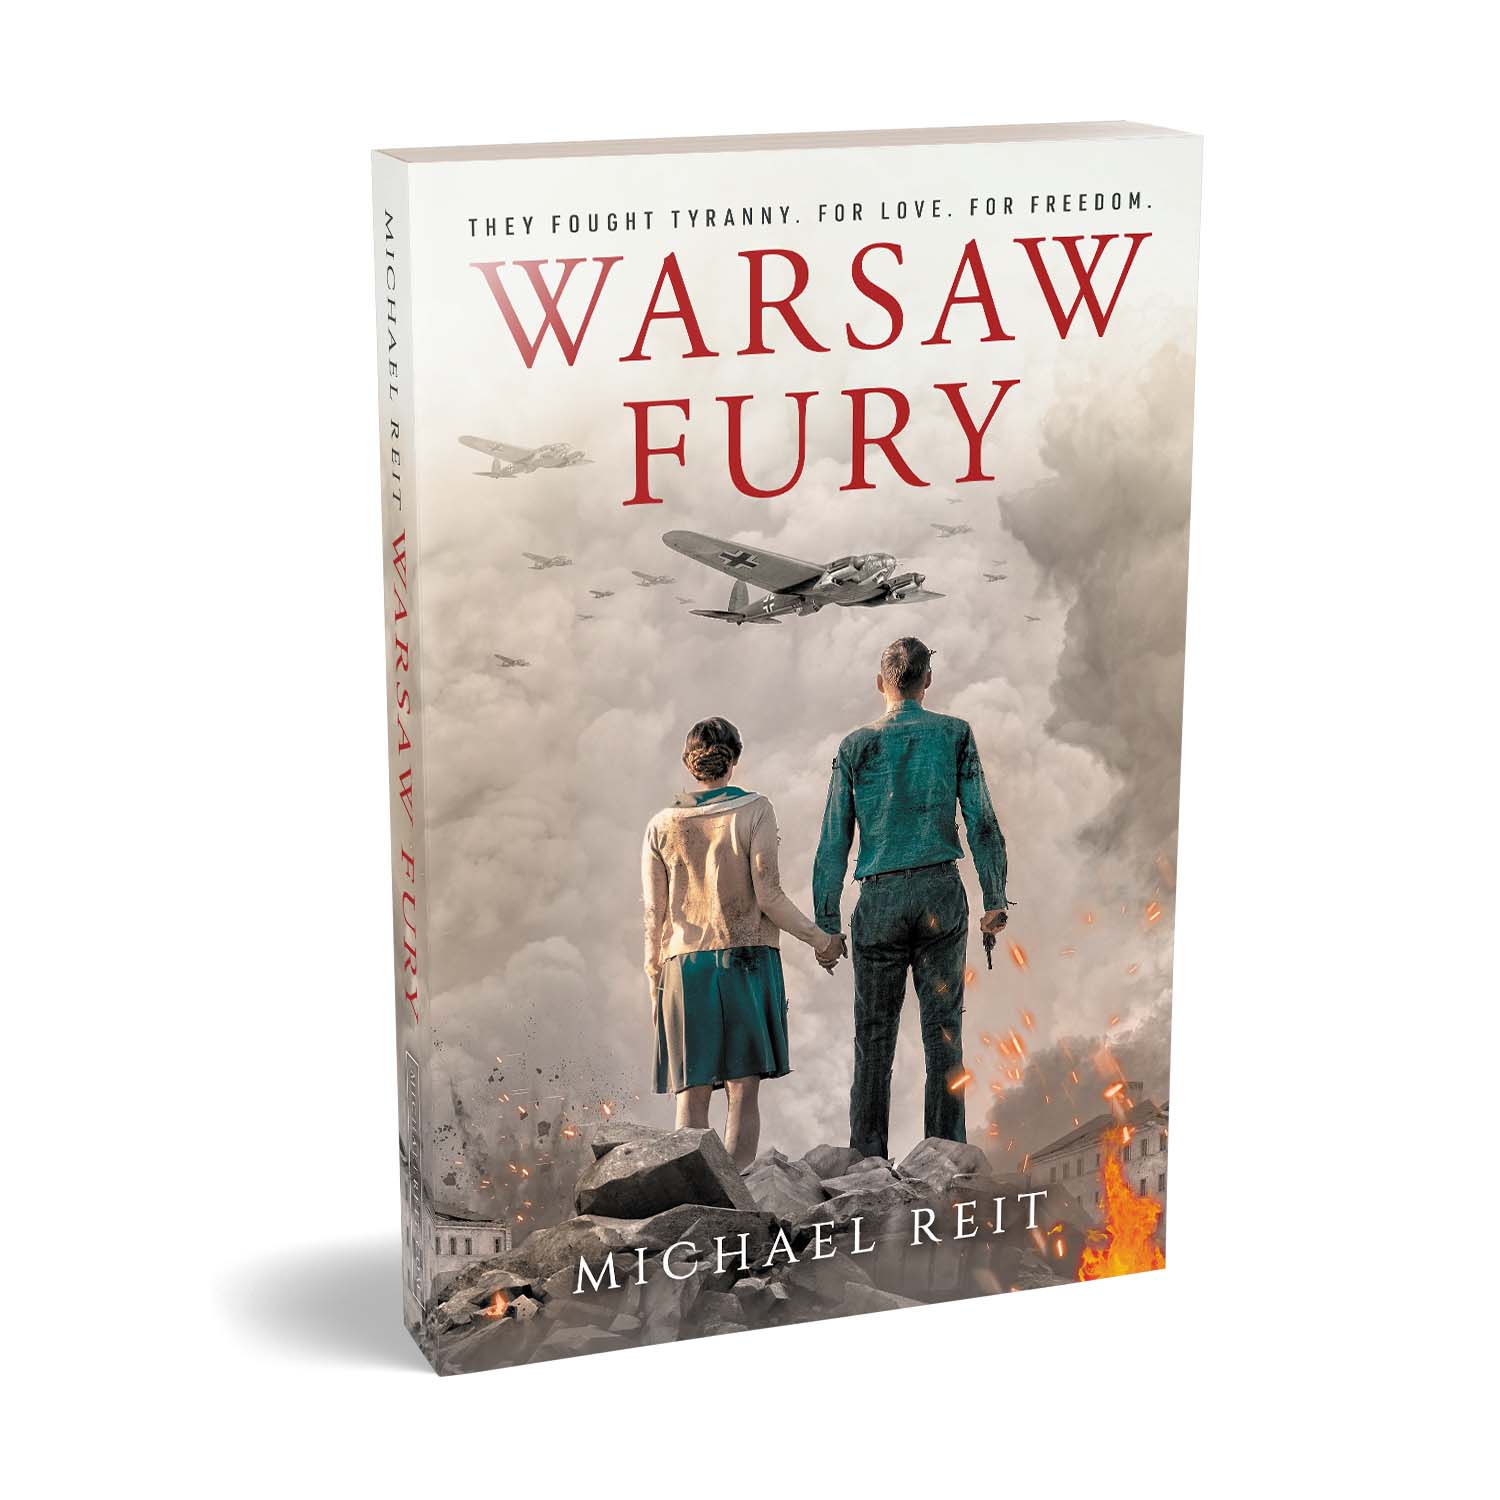 'Warsaw Fury' is a sweeping and shocking based-on-fact WW2 novel. The author is Michael Reit. The cover and interior design of the book are by Mark Thomas. To learn more about what Mark could do for your book, please visit coverness.com.